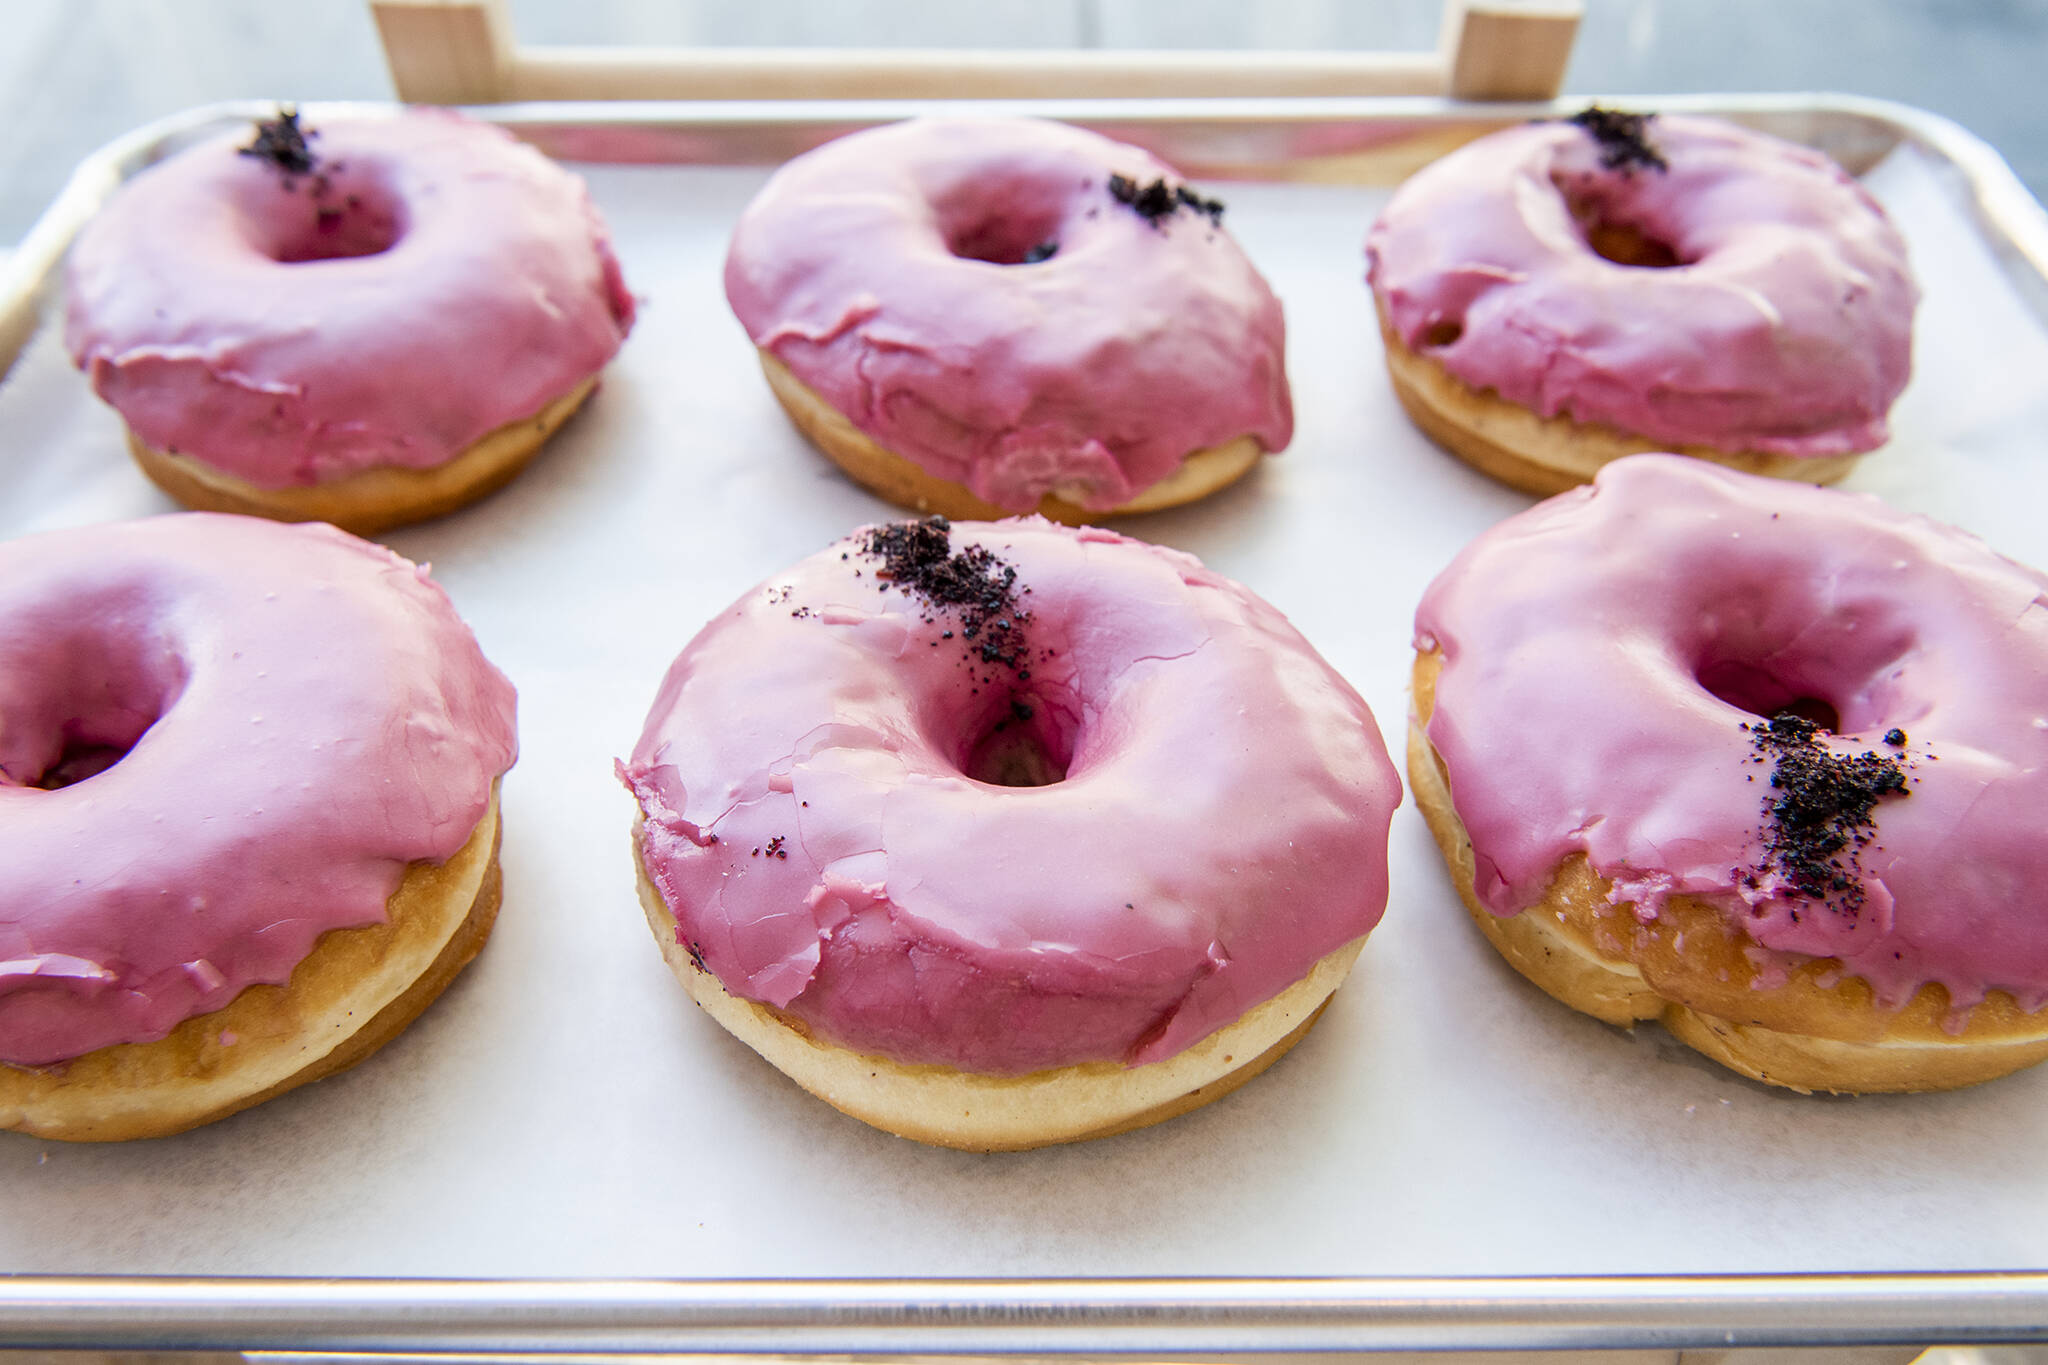 Donut delivery options in Toronto article by blogTO